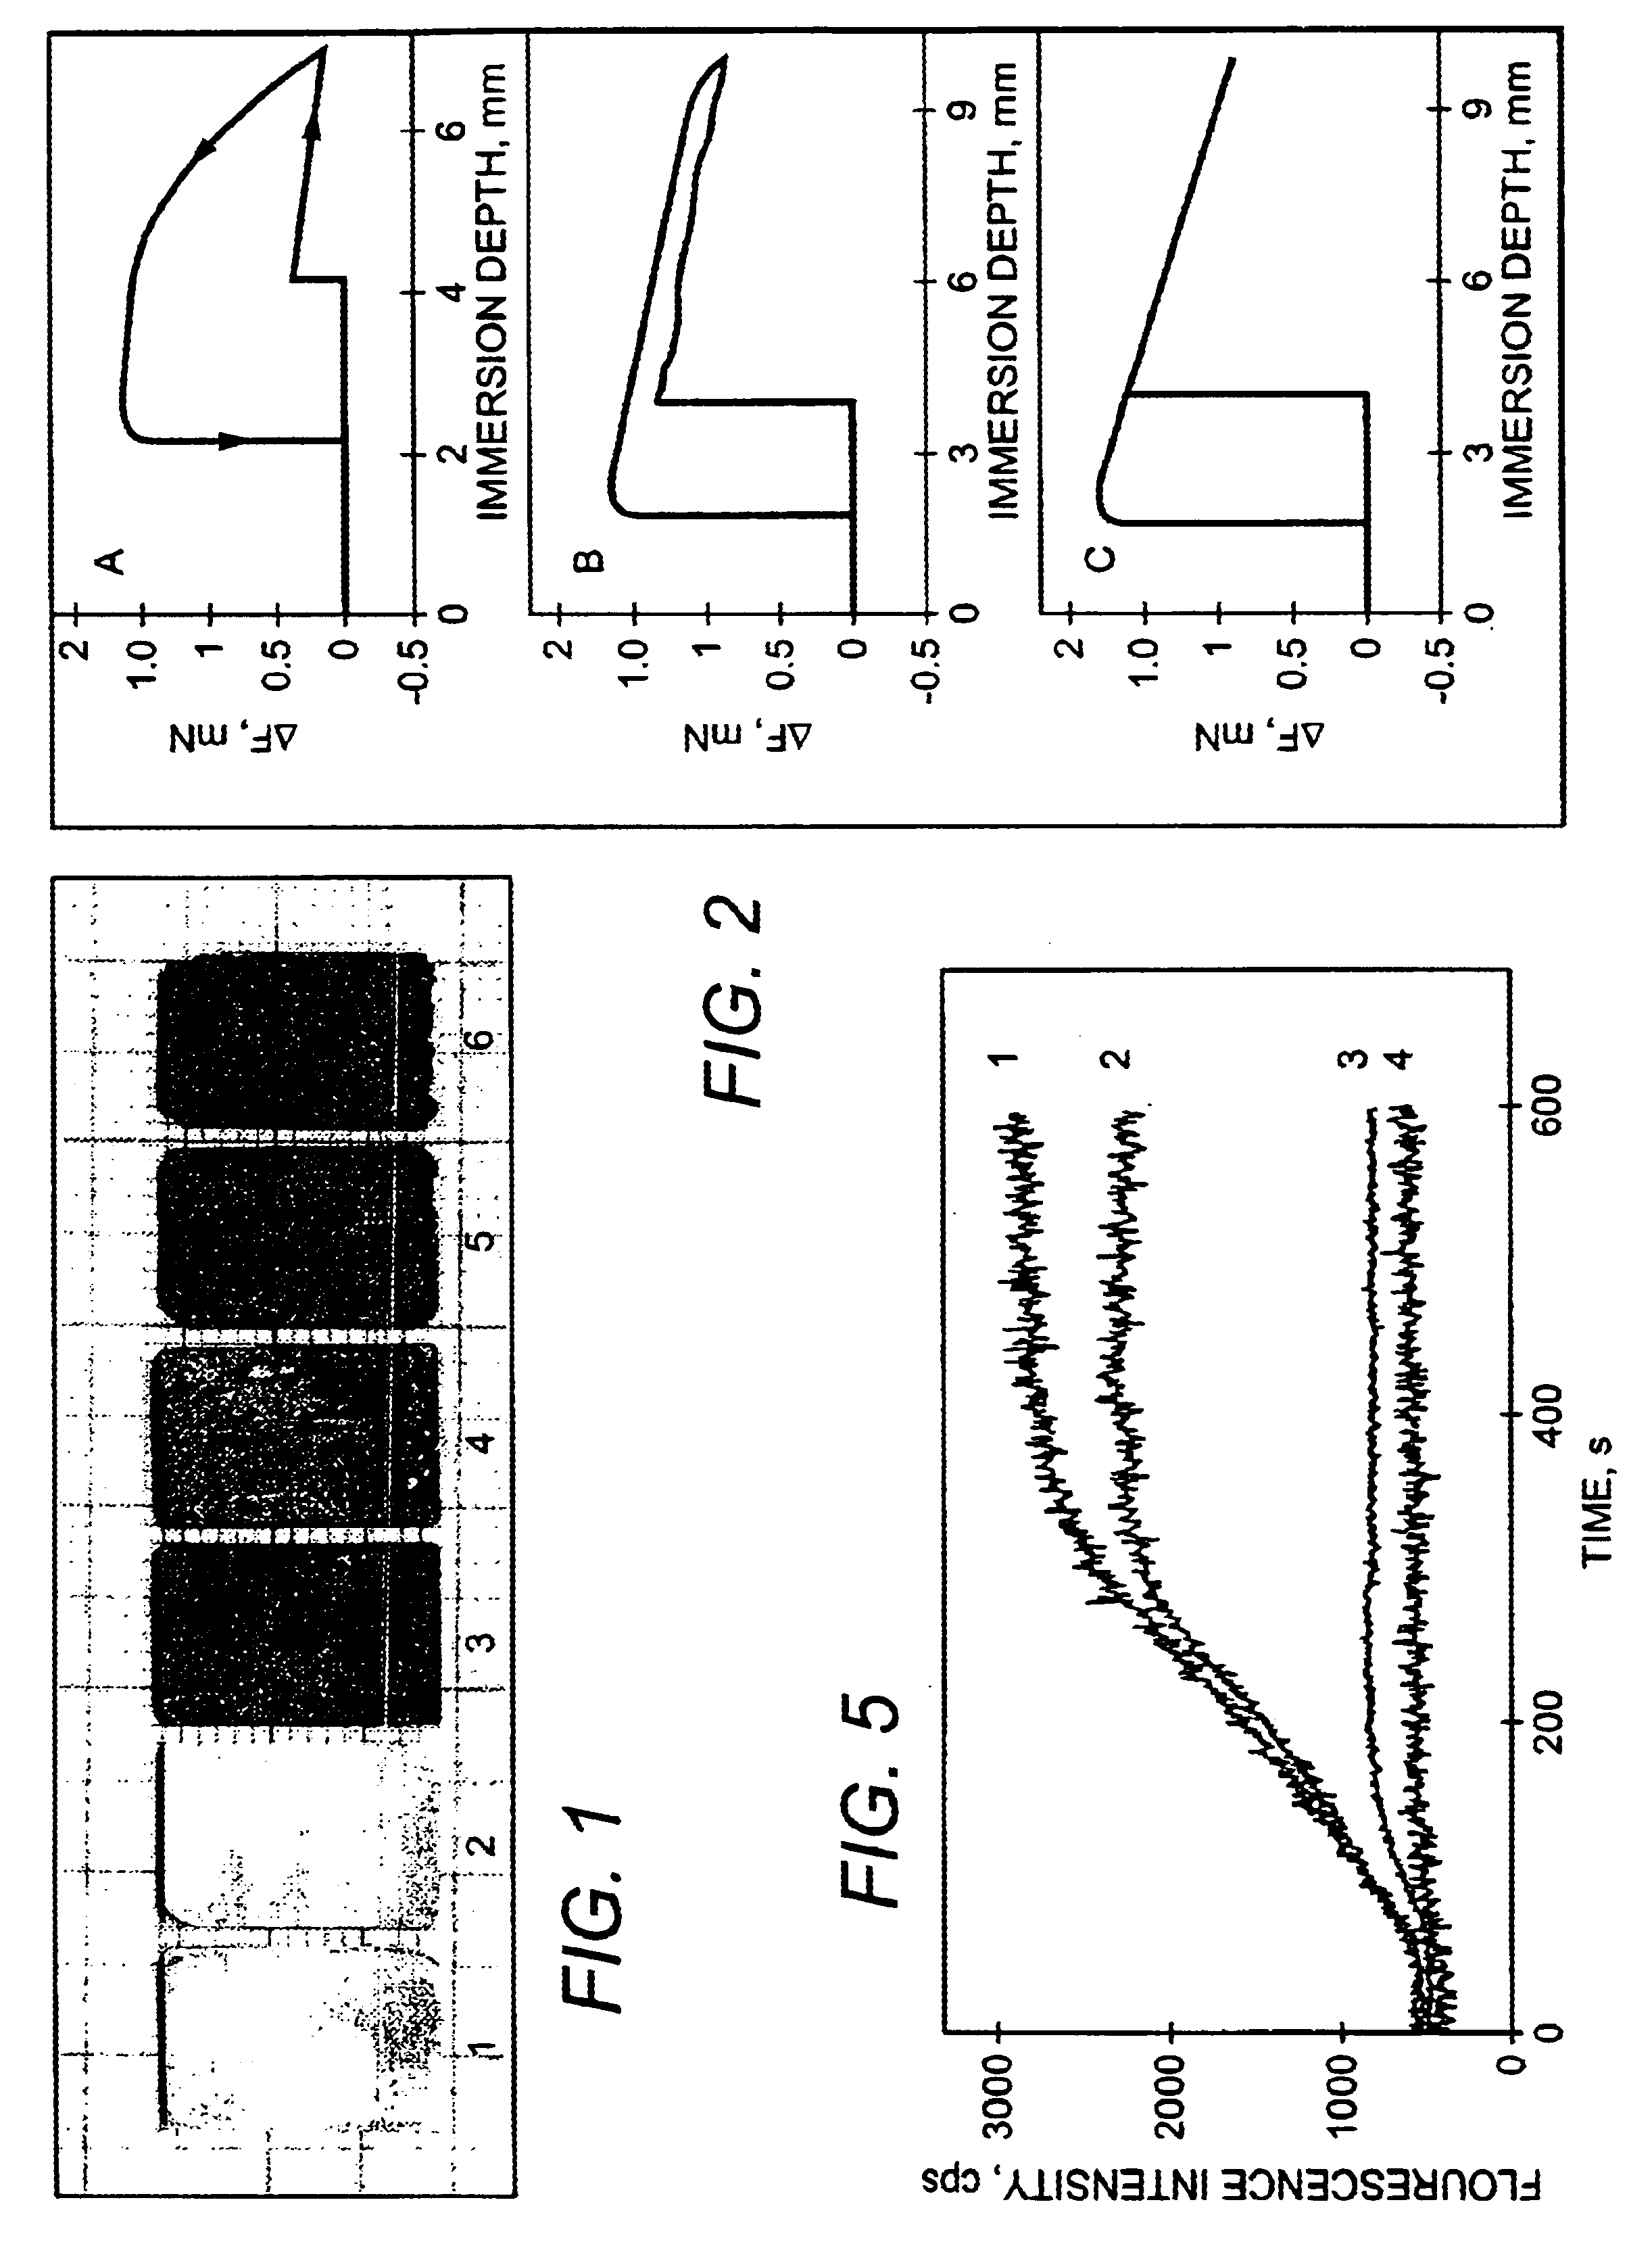 Immobilizing mediator molecules via anchor molecules on metallic implant materials containing oxide layer